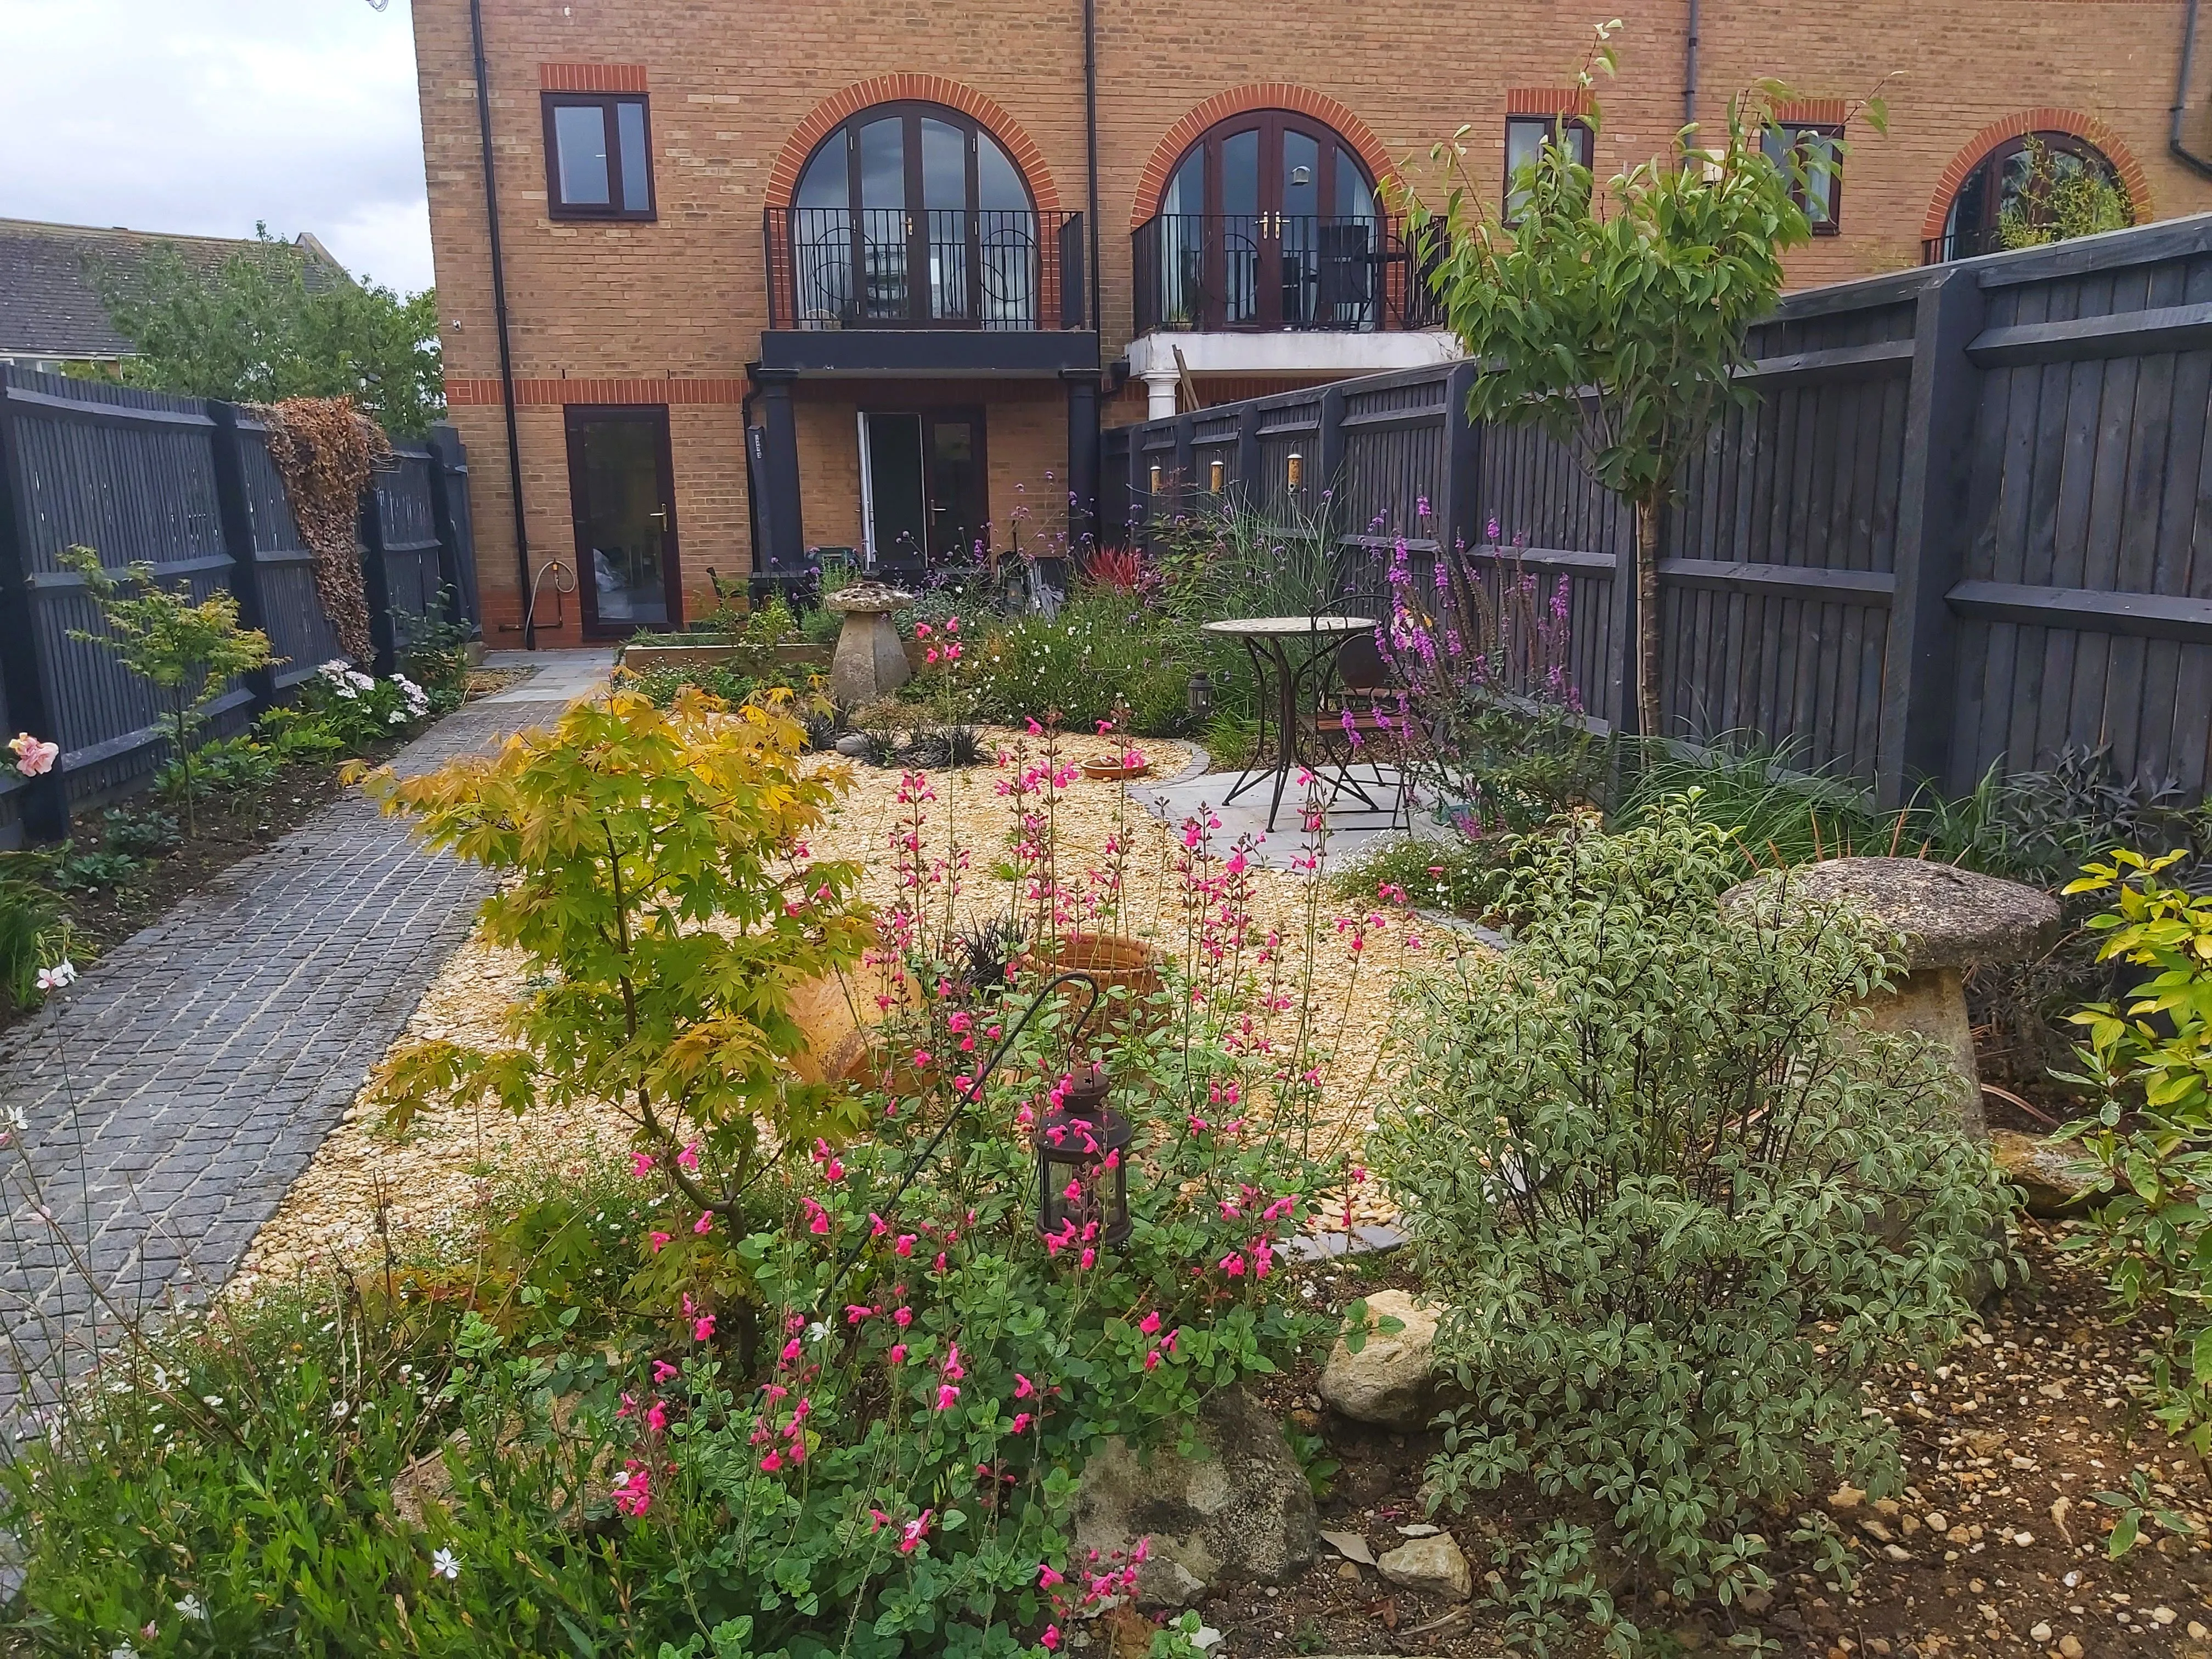 The same view of the house. The grass has been replaced with a bistro set on gravel, surrounded by bright flowerbeds